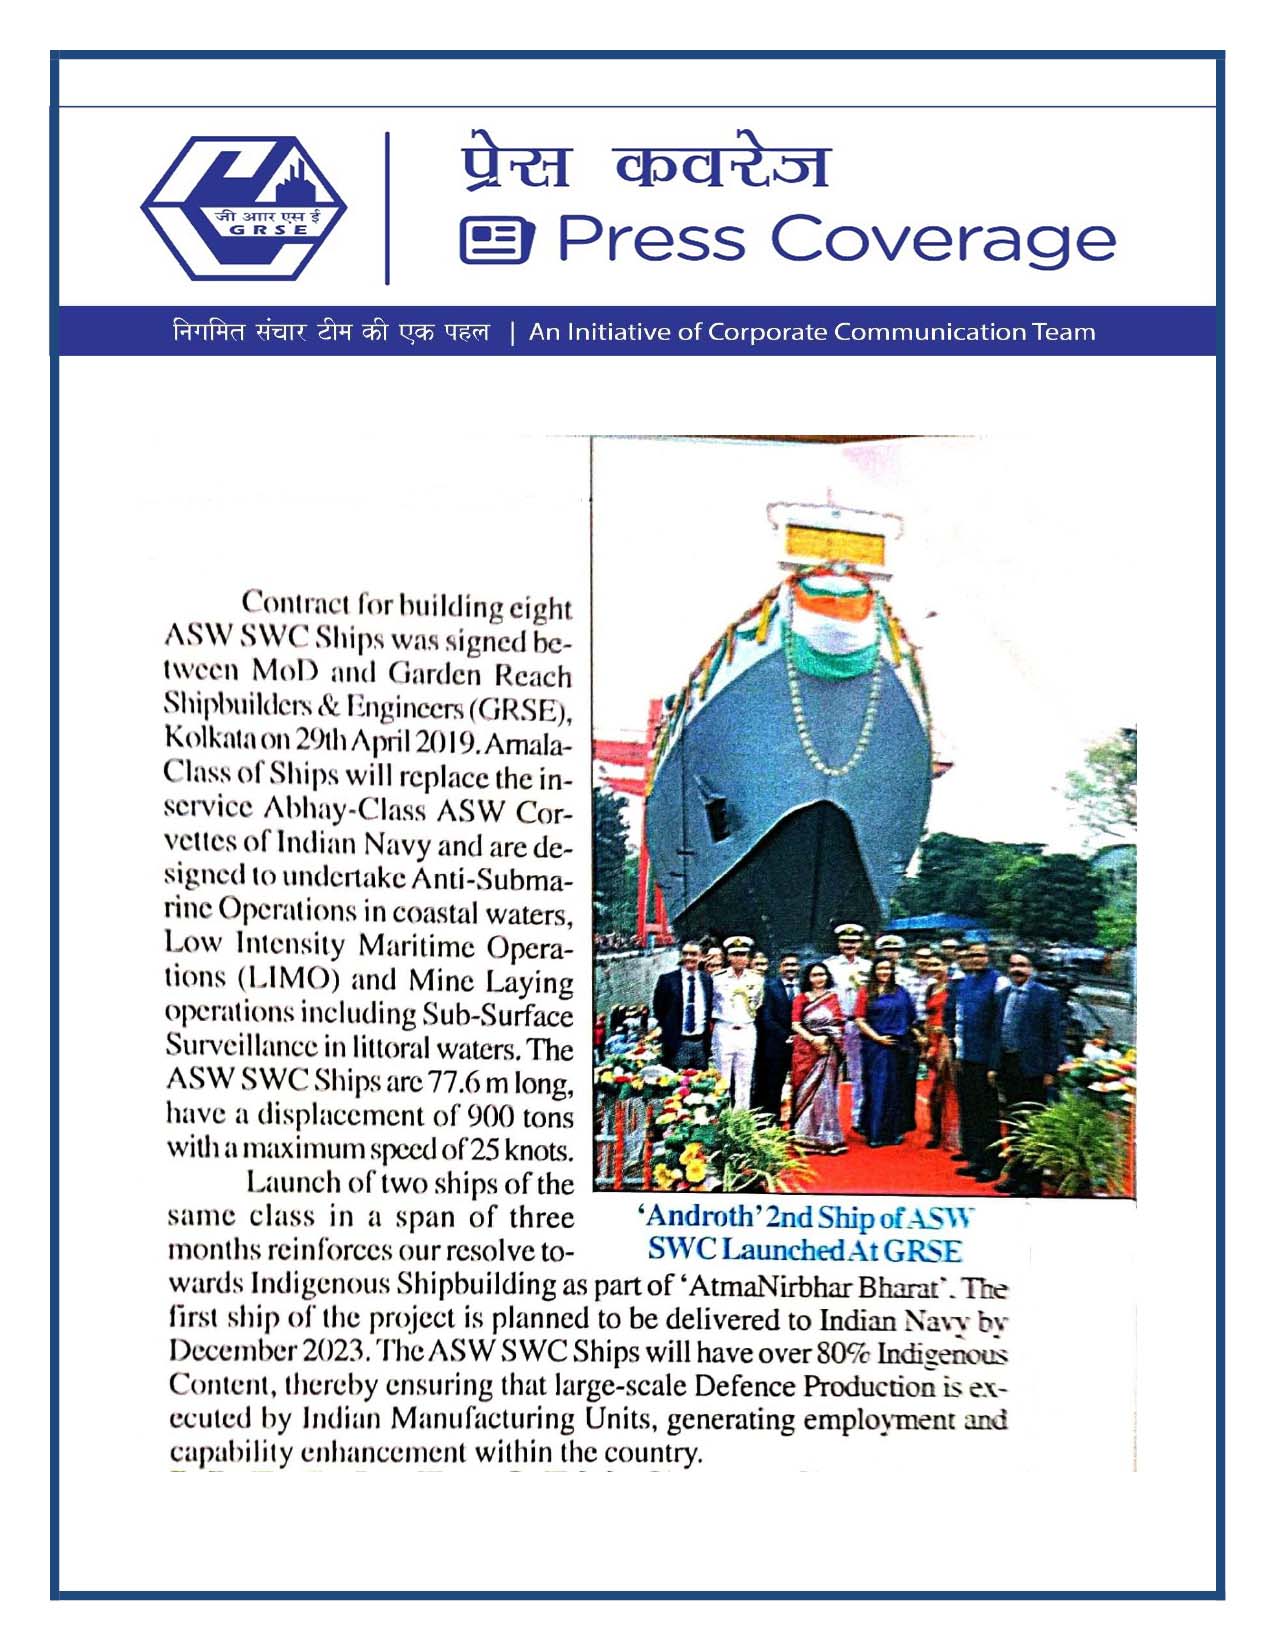 Launch of 'Androth', Second Ship of ASW SWC project at GRSE